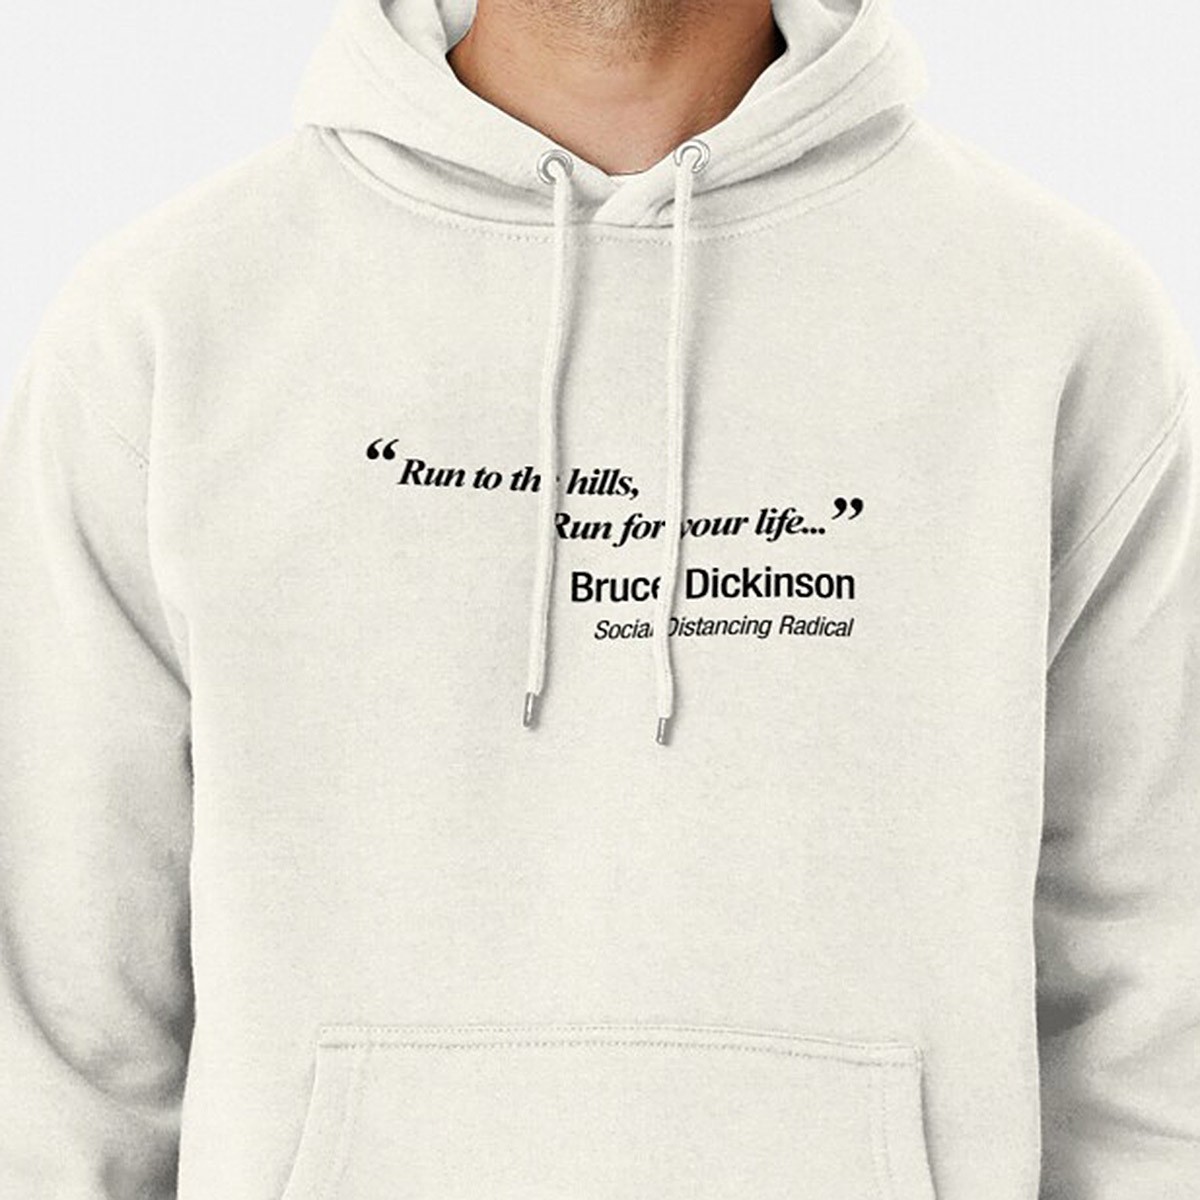 Run to the hills! - Bruce Dickinson & Iron Maiden Parody Hoodie by NTK Apparel